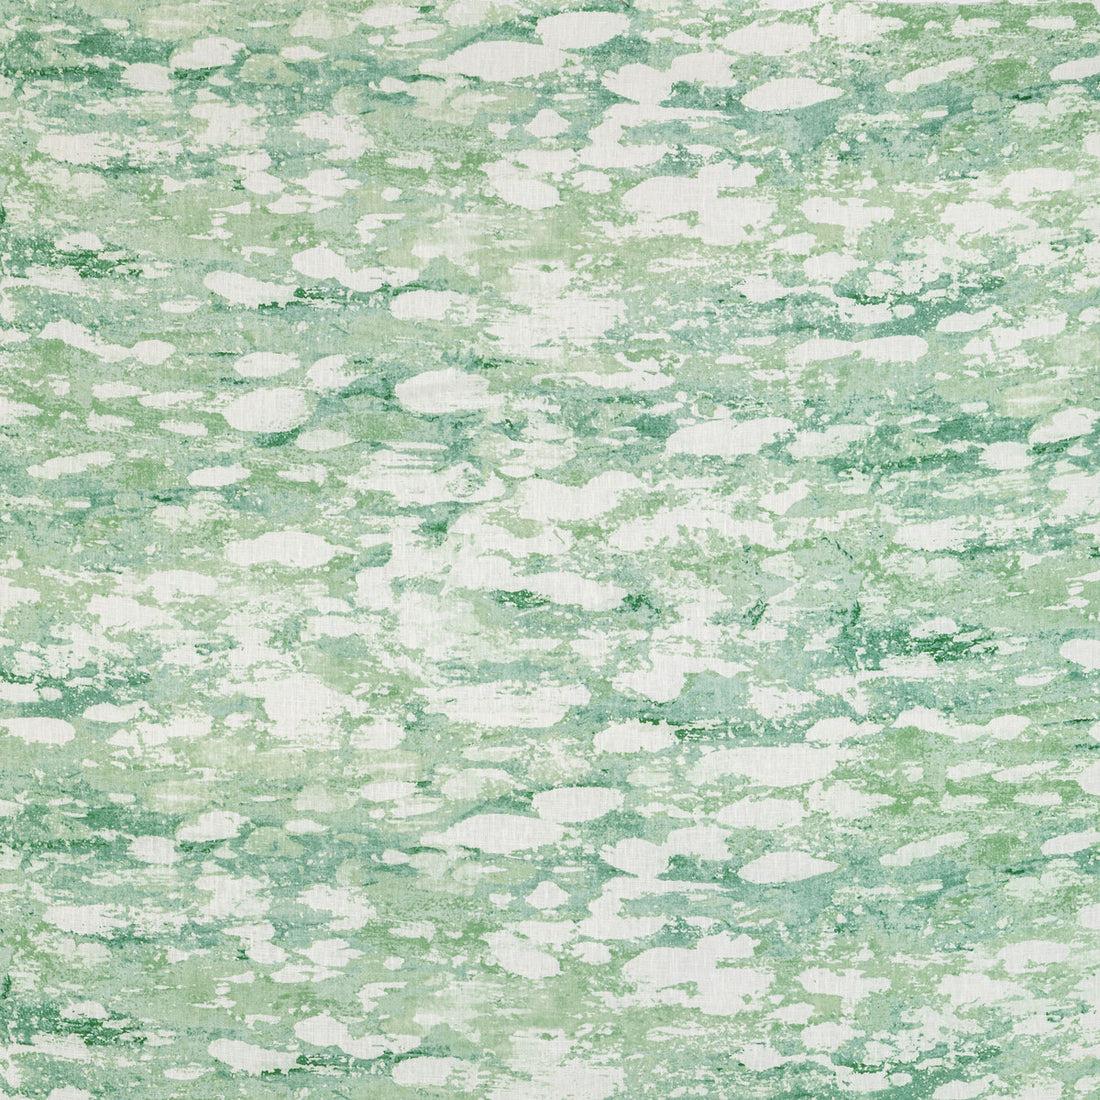 Lost Coast fabric in lagoon color - pattern LOST COAST.3.0 - by Kravet Design in the Jeffrey Alan Marks Seascapes collection